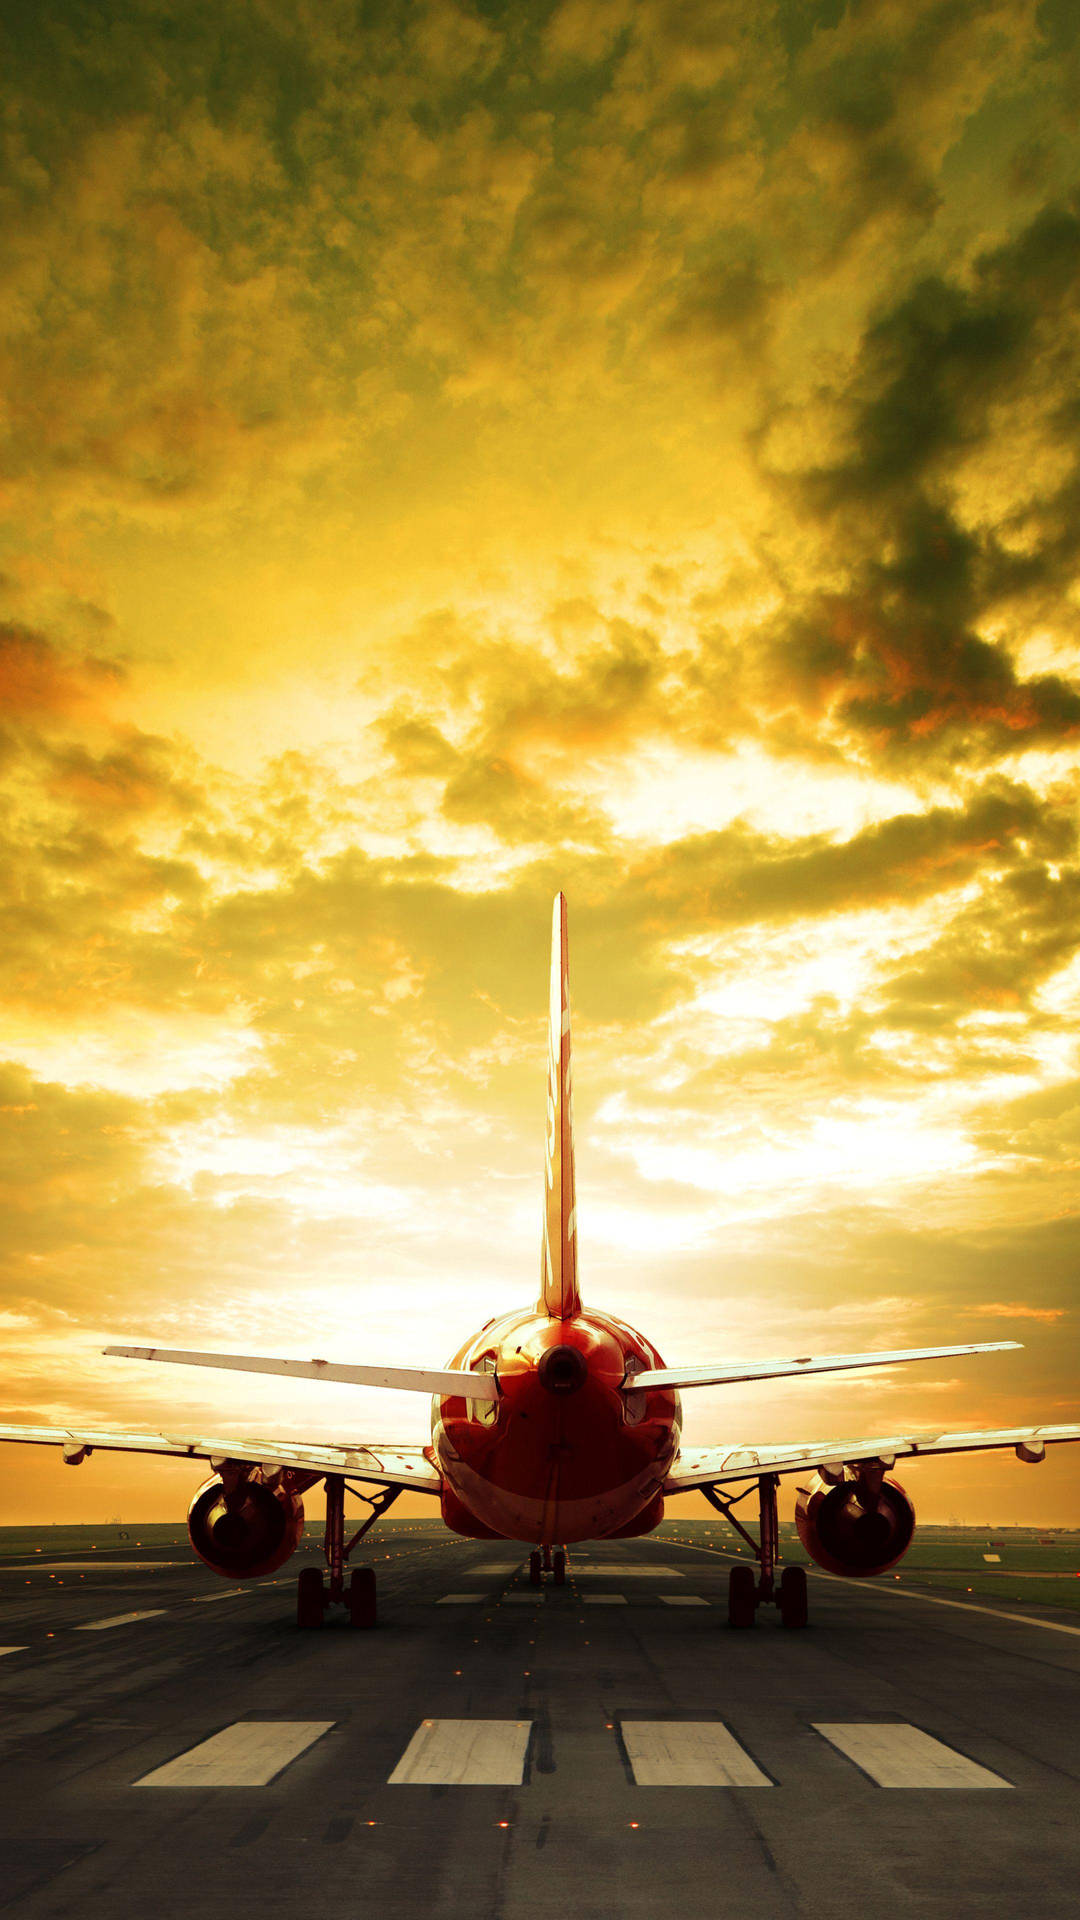 Sunset With A Red Jet Iphone Wallpaper